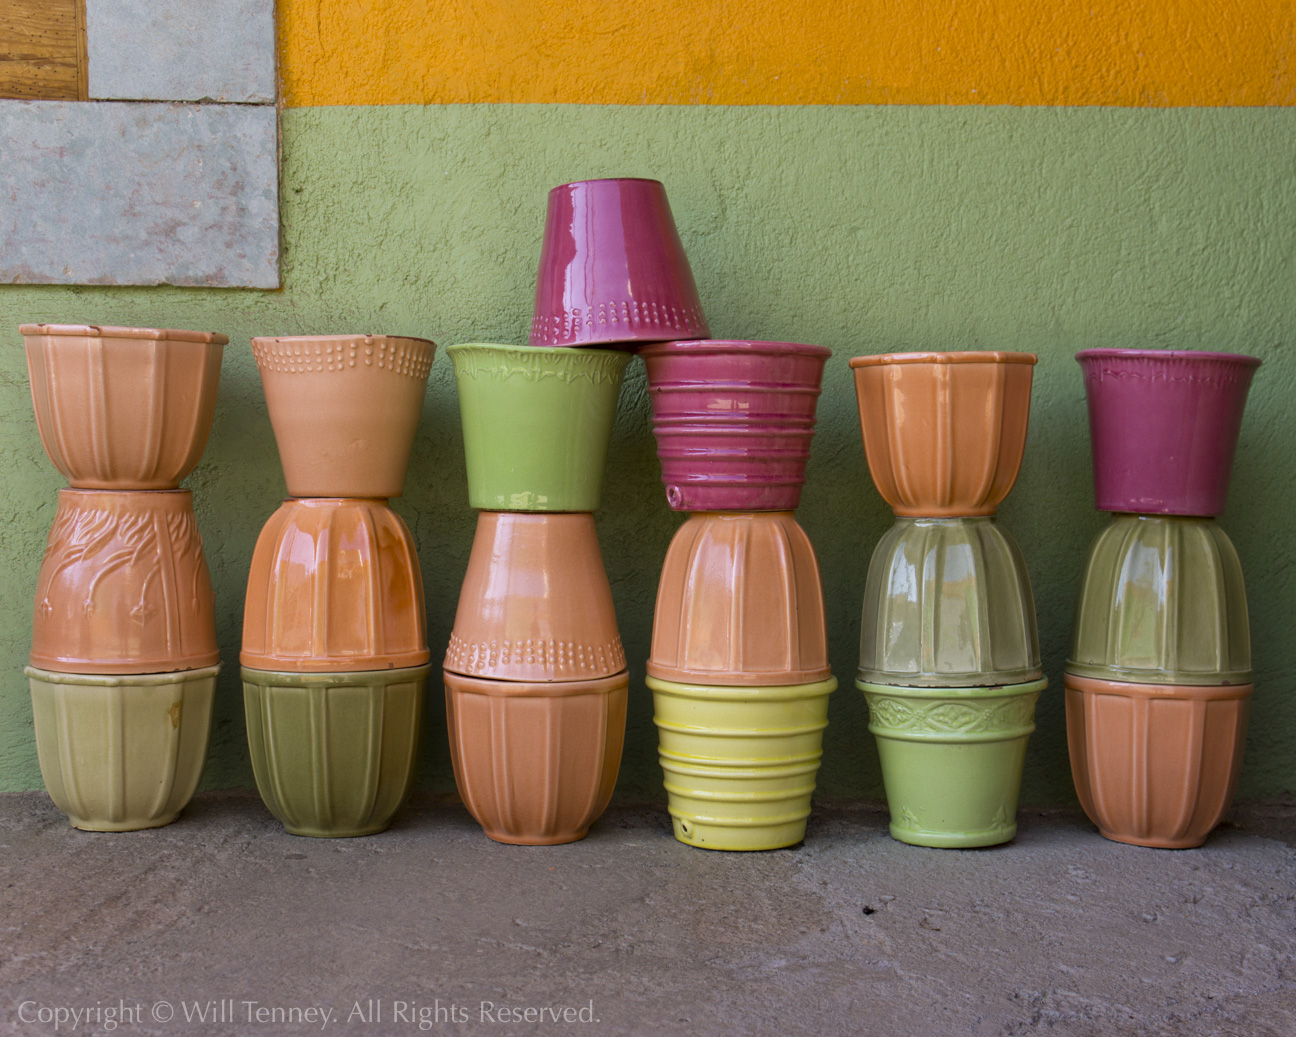 Planters On Display: Photograph by Will Tenney